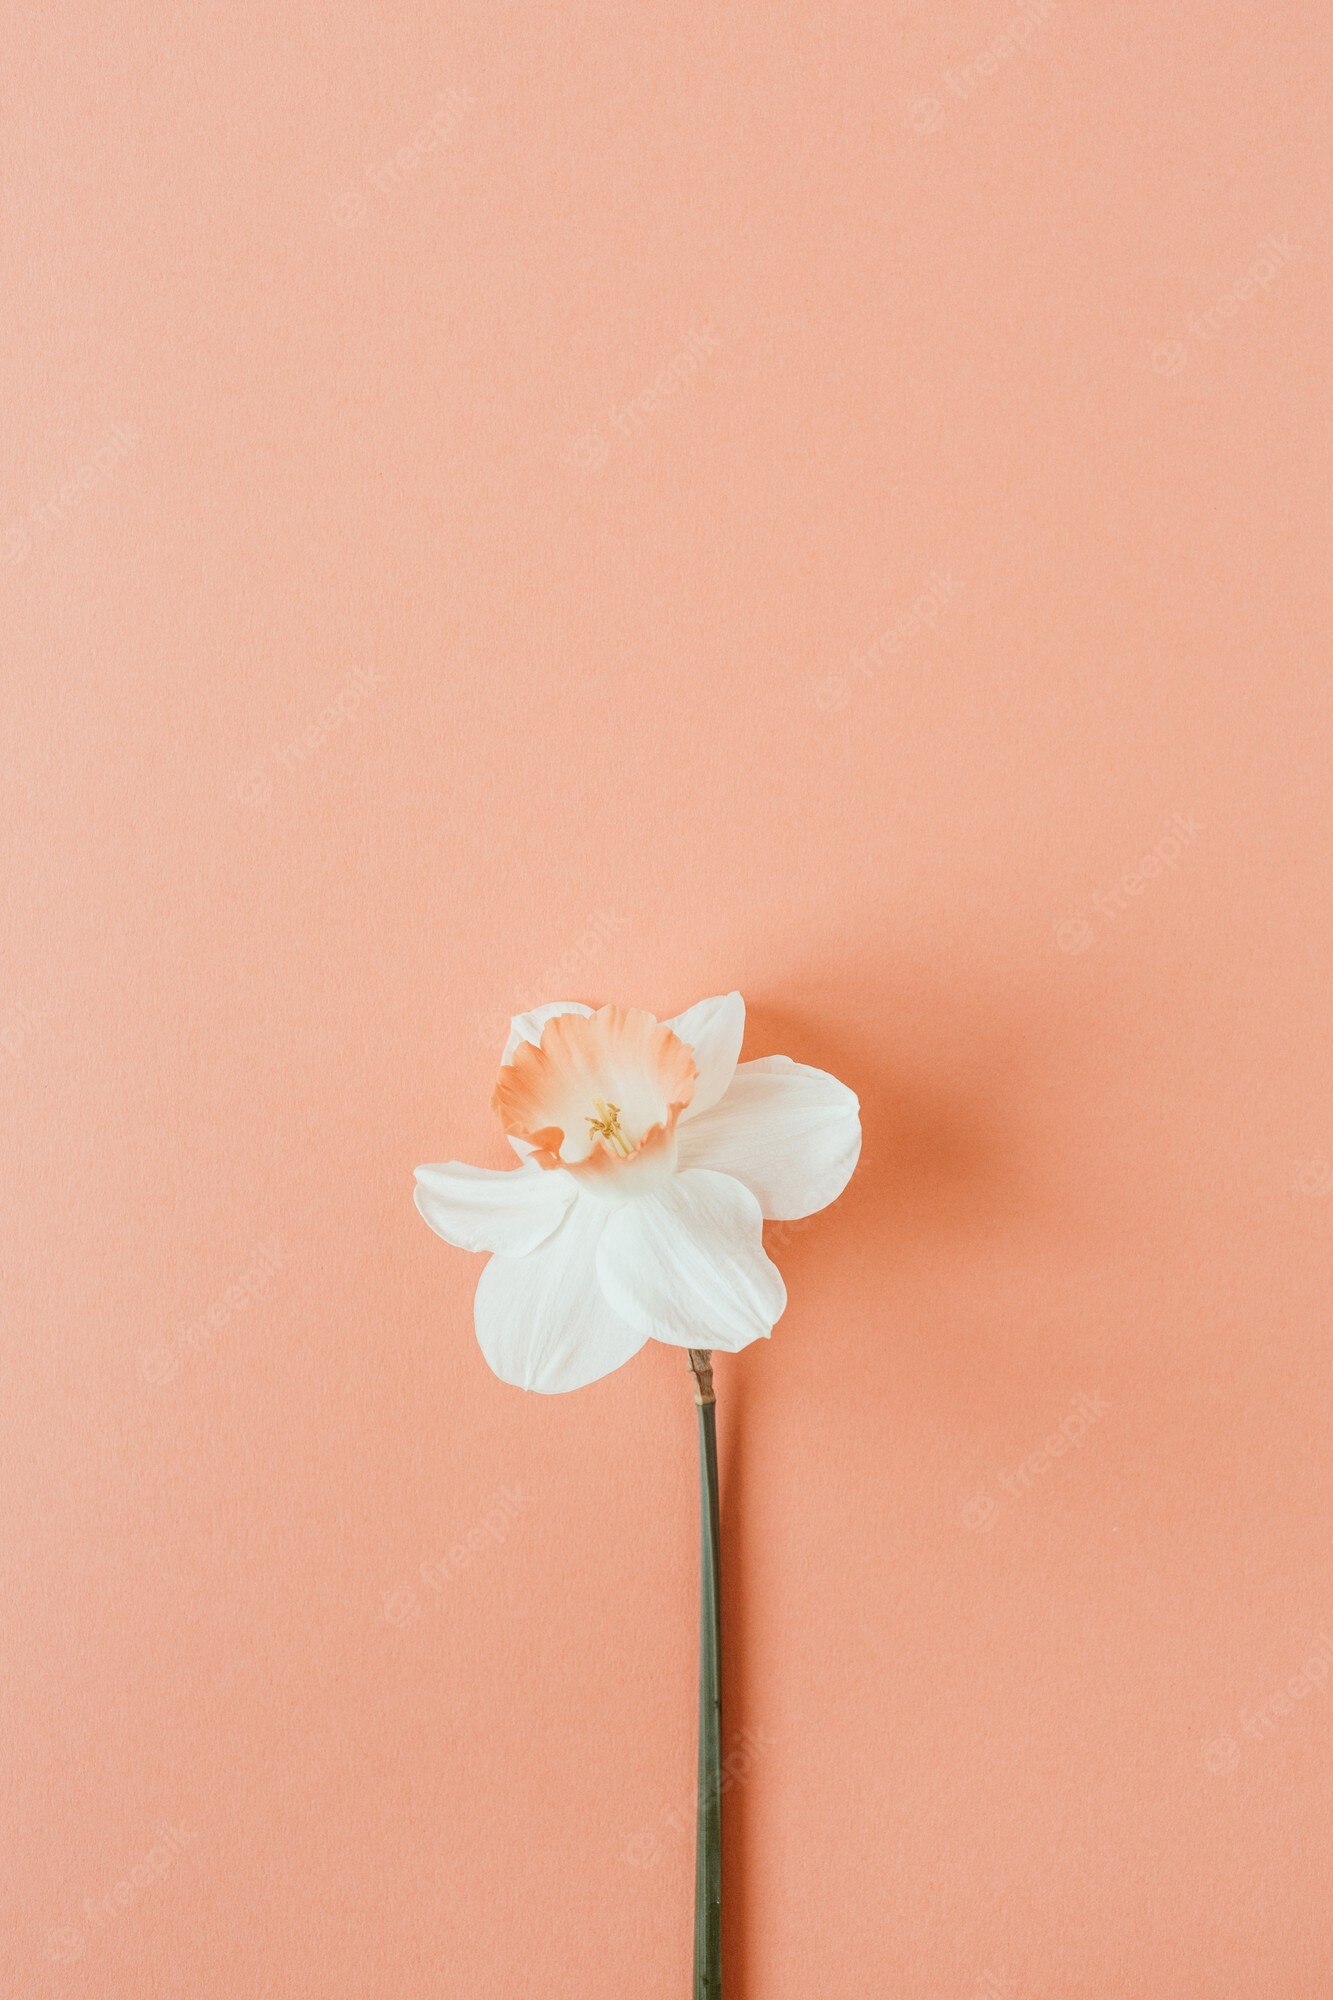 Premium Photo. Narcissus flower on living coral background. flatlay, top view